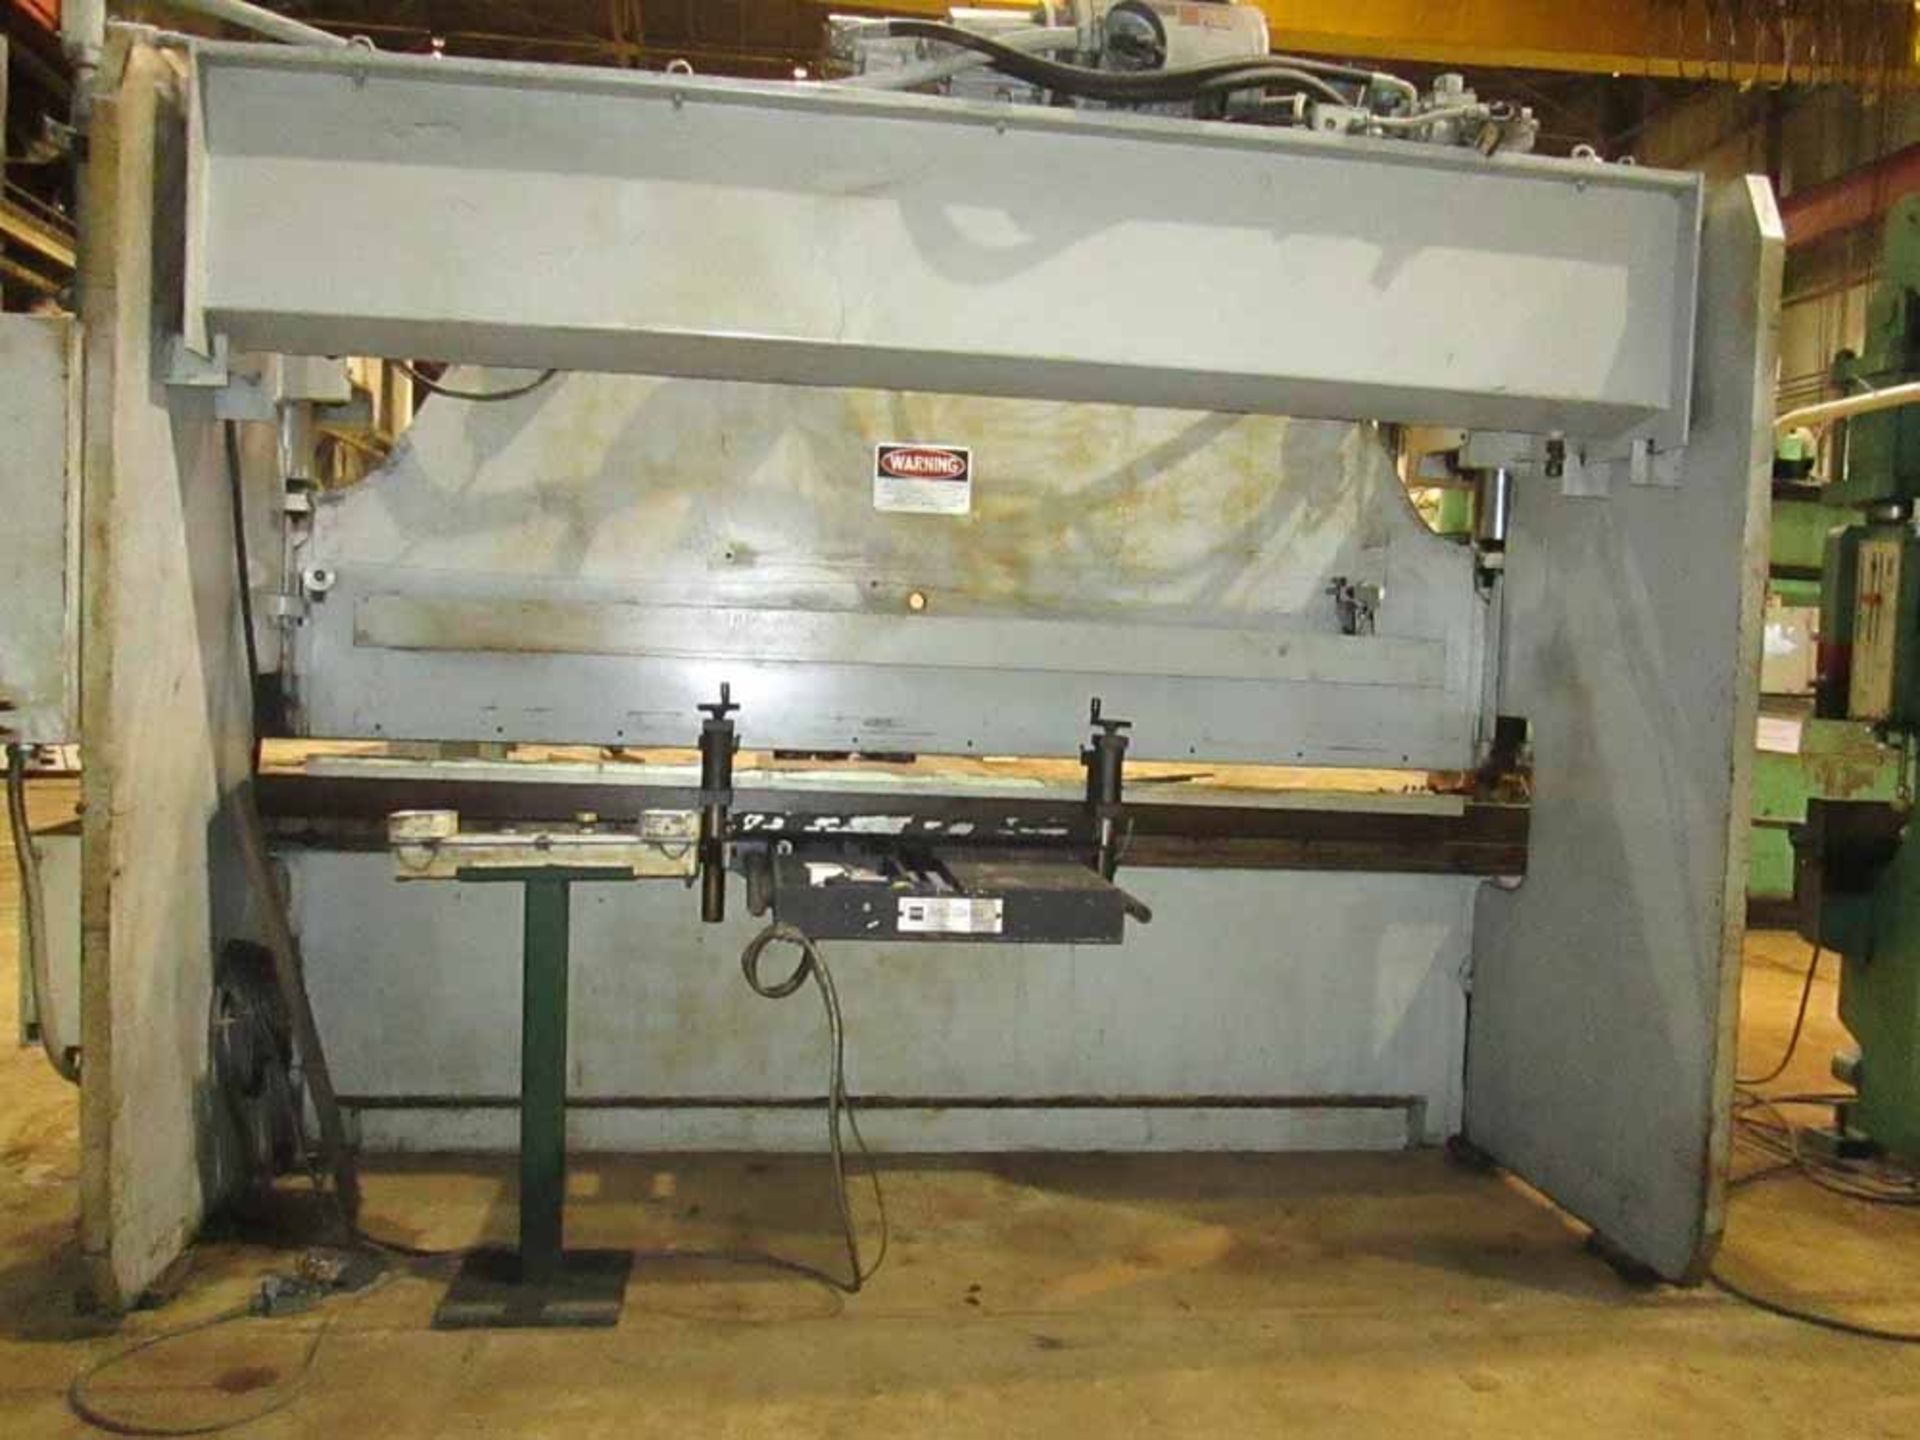 Pacific CNC 2 Axis Hyd. Press Brake, 110-Ton x 12' - Located In Painesville, OH - 6426 - Image 8 of 12